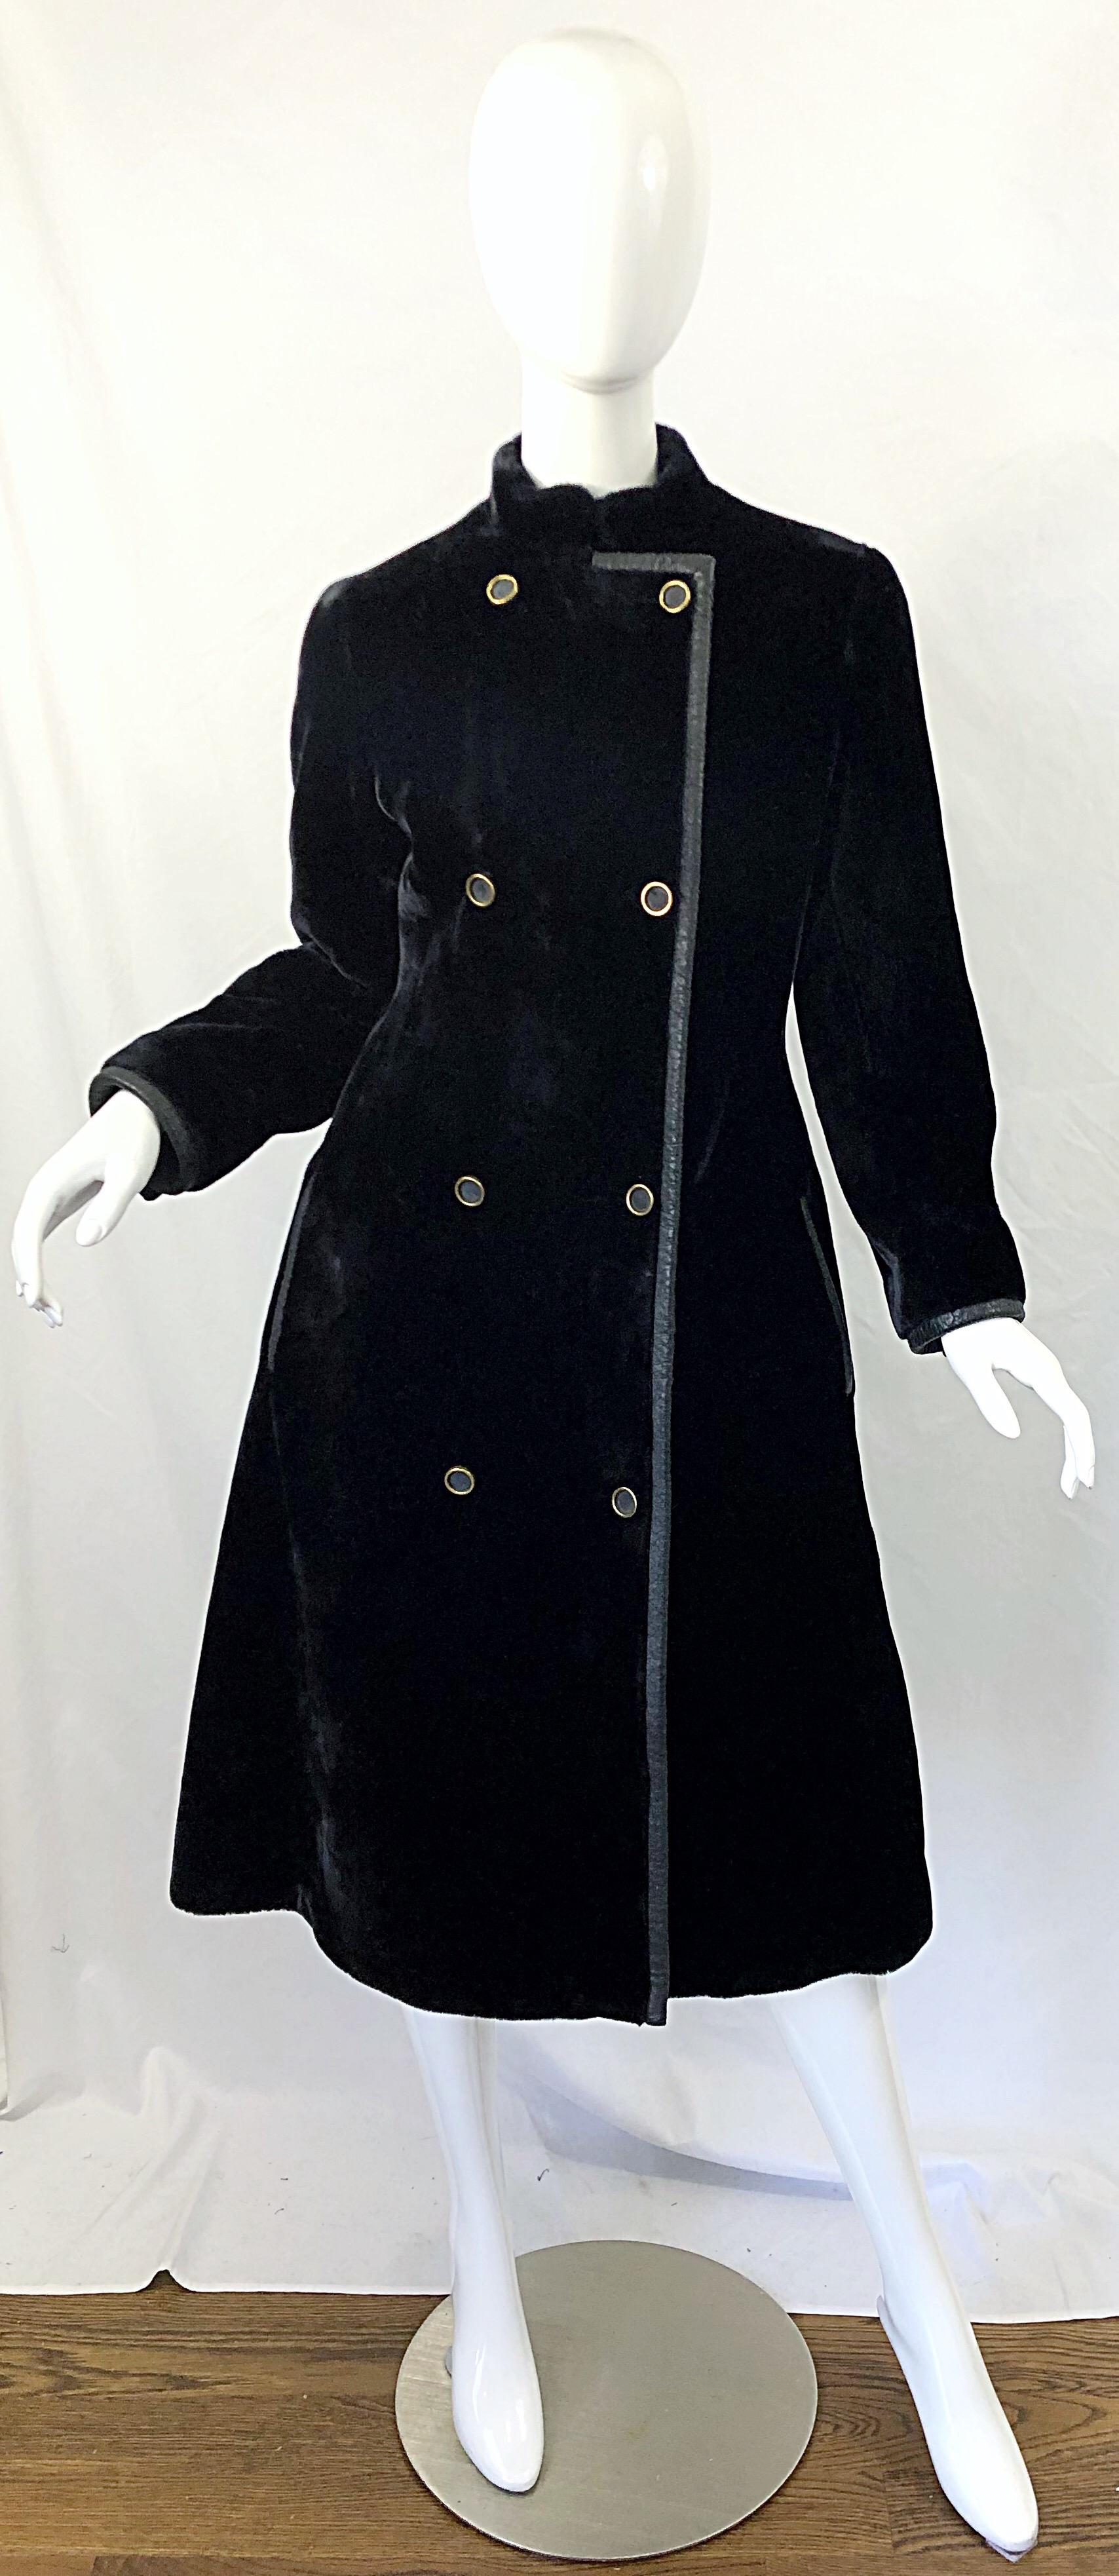 Chic 1960s GIVENCHY borg plush faux fur black double breasted women's swing jacket coat ! Features black and gold buttons up the front. Black leather like piping. POCKETs at each side of the hips. Fully lined. The perfect winter coat that can easily